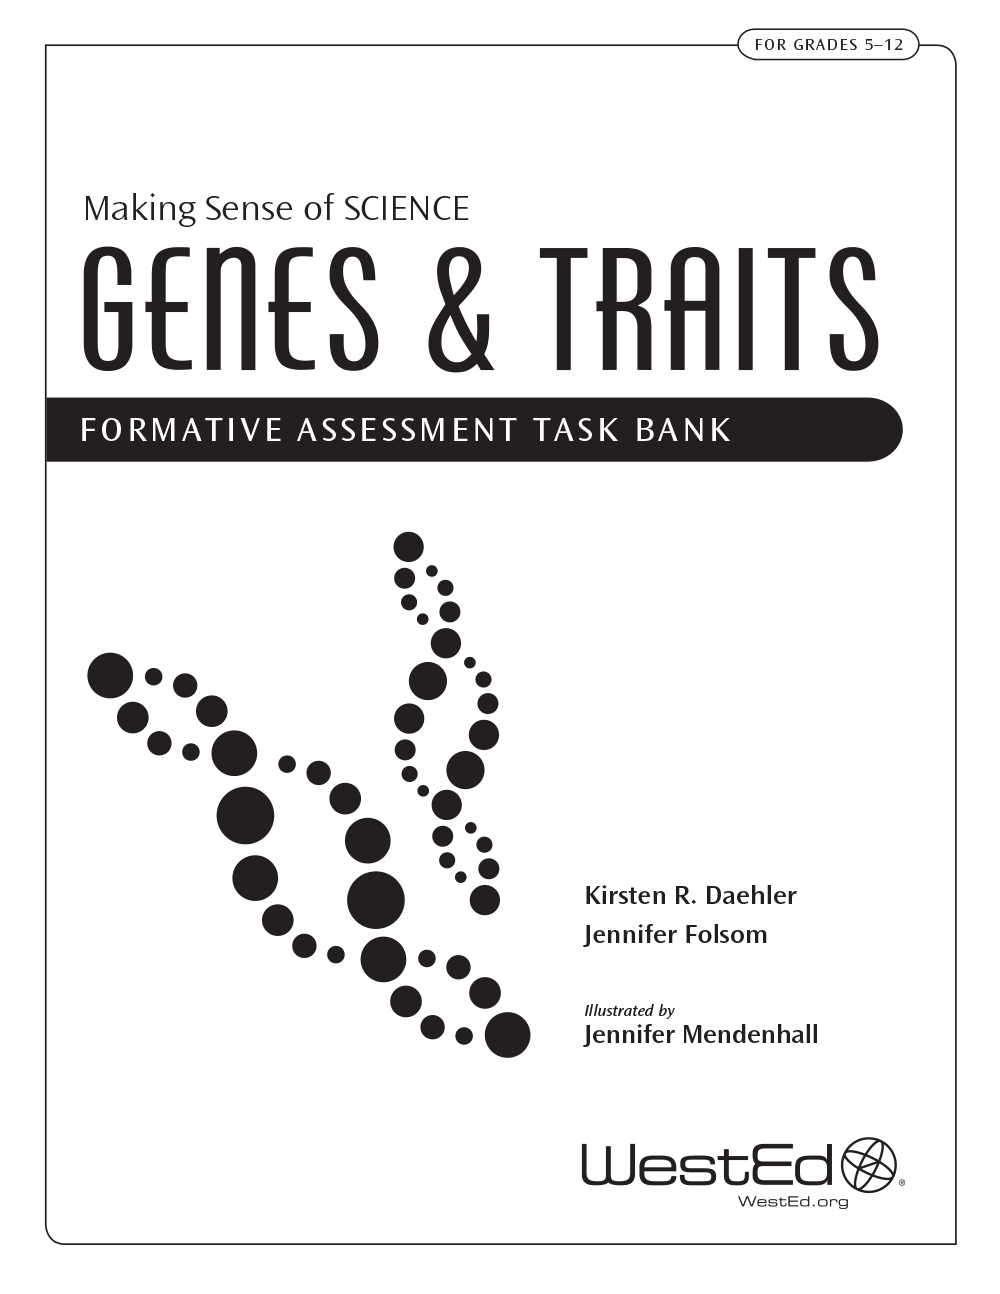 Cover image for Making Sense of Science: Genes & Traits Formative Assessment Task Bank